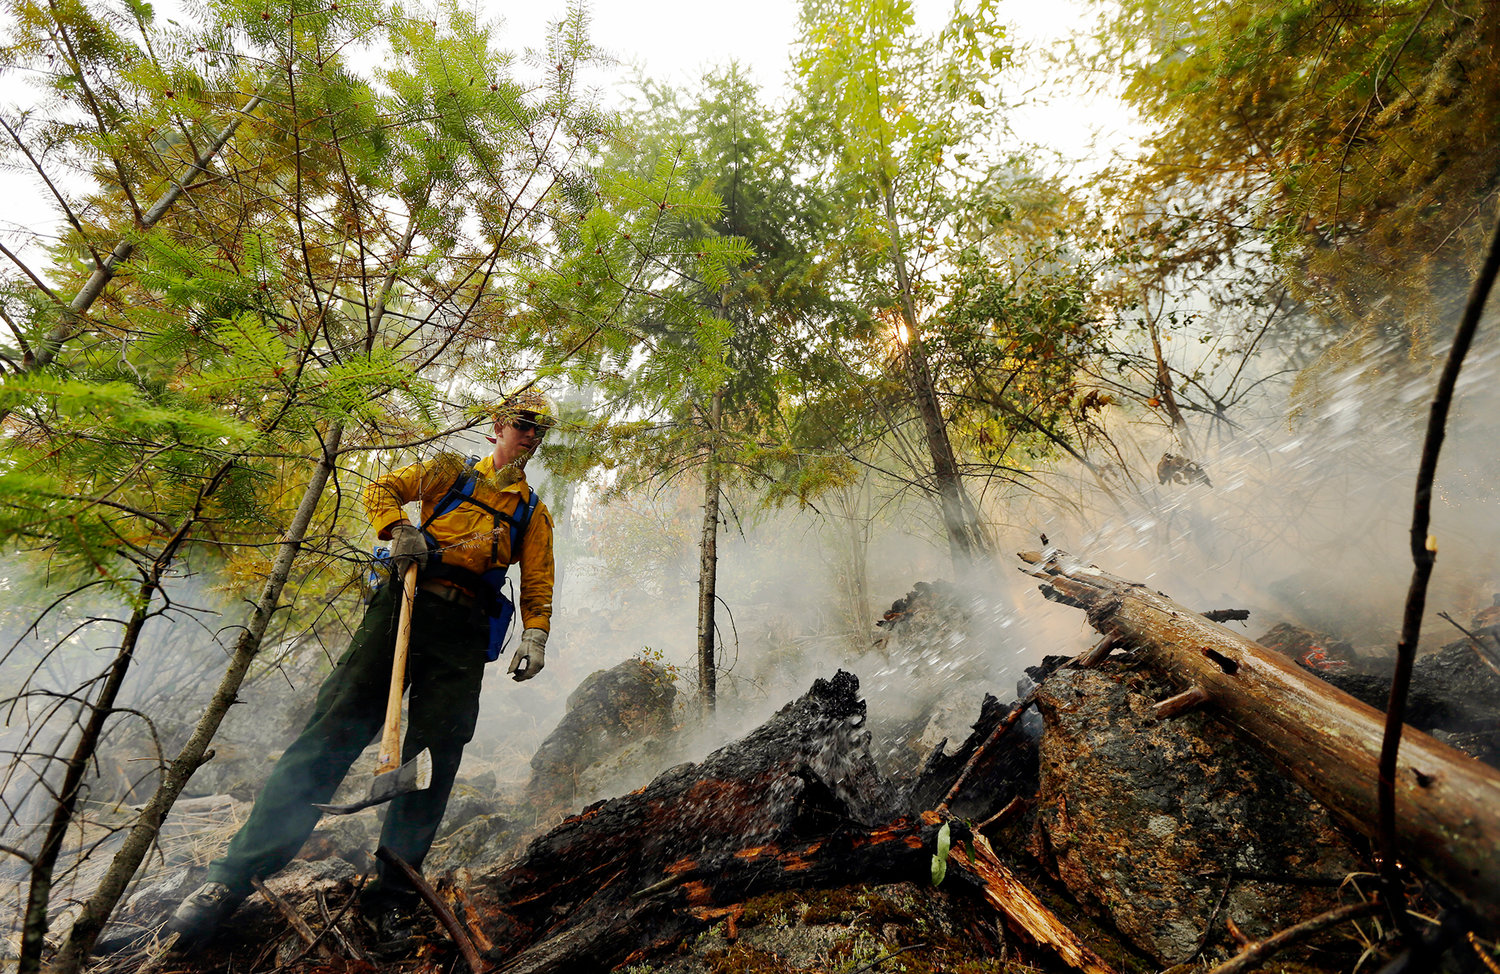 Washington National Guard Sgt. Matt Eagen, left, breaks up wood and soil looking for hot spots as the hillside is sprayed with water, Tuesday, Aug. 18, 2015, near Chelan, Wash. The troops in Washington state were part of a massive response to blazes burning uncontrolled throughout the West. (AP Photo/Ted S. Warren)